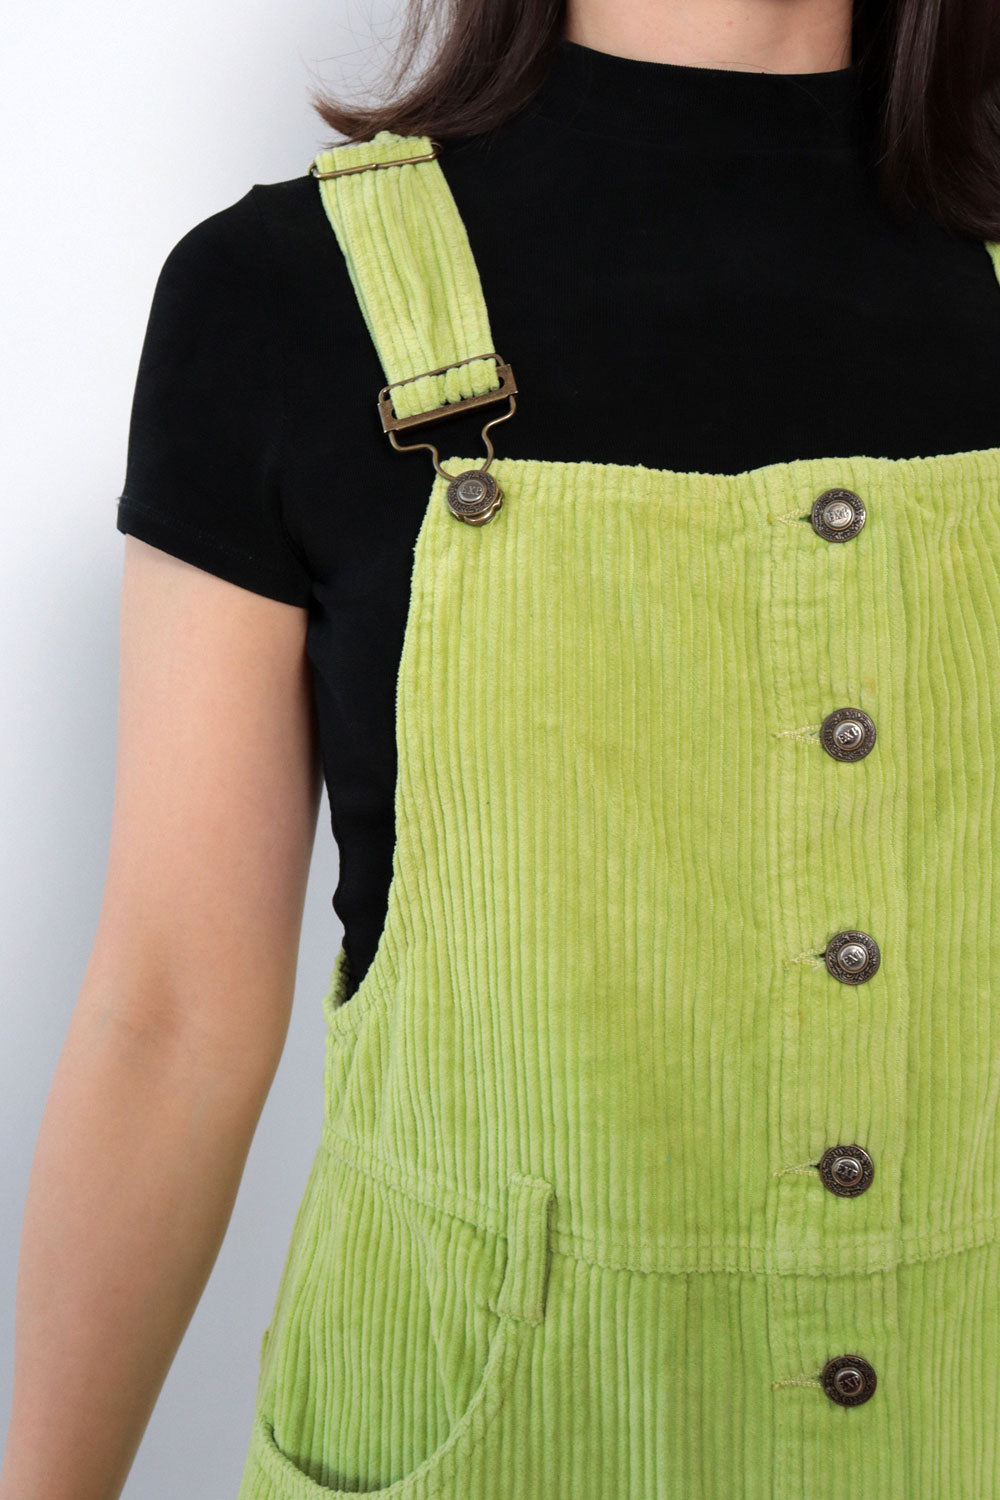 Lime Corduroy Overall Jumper XS-M